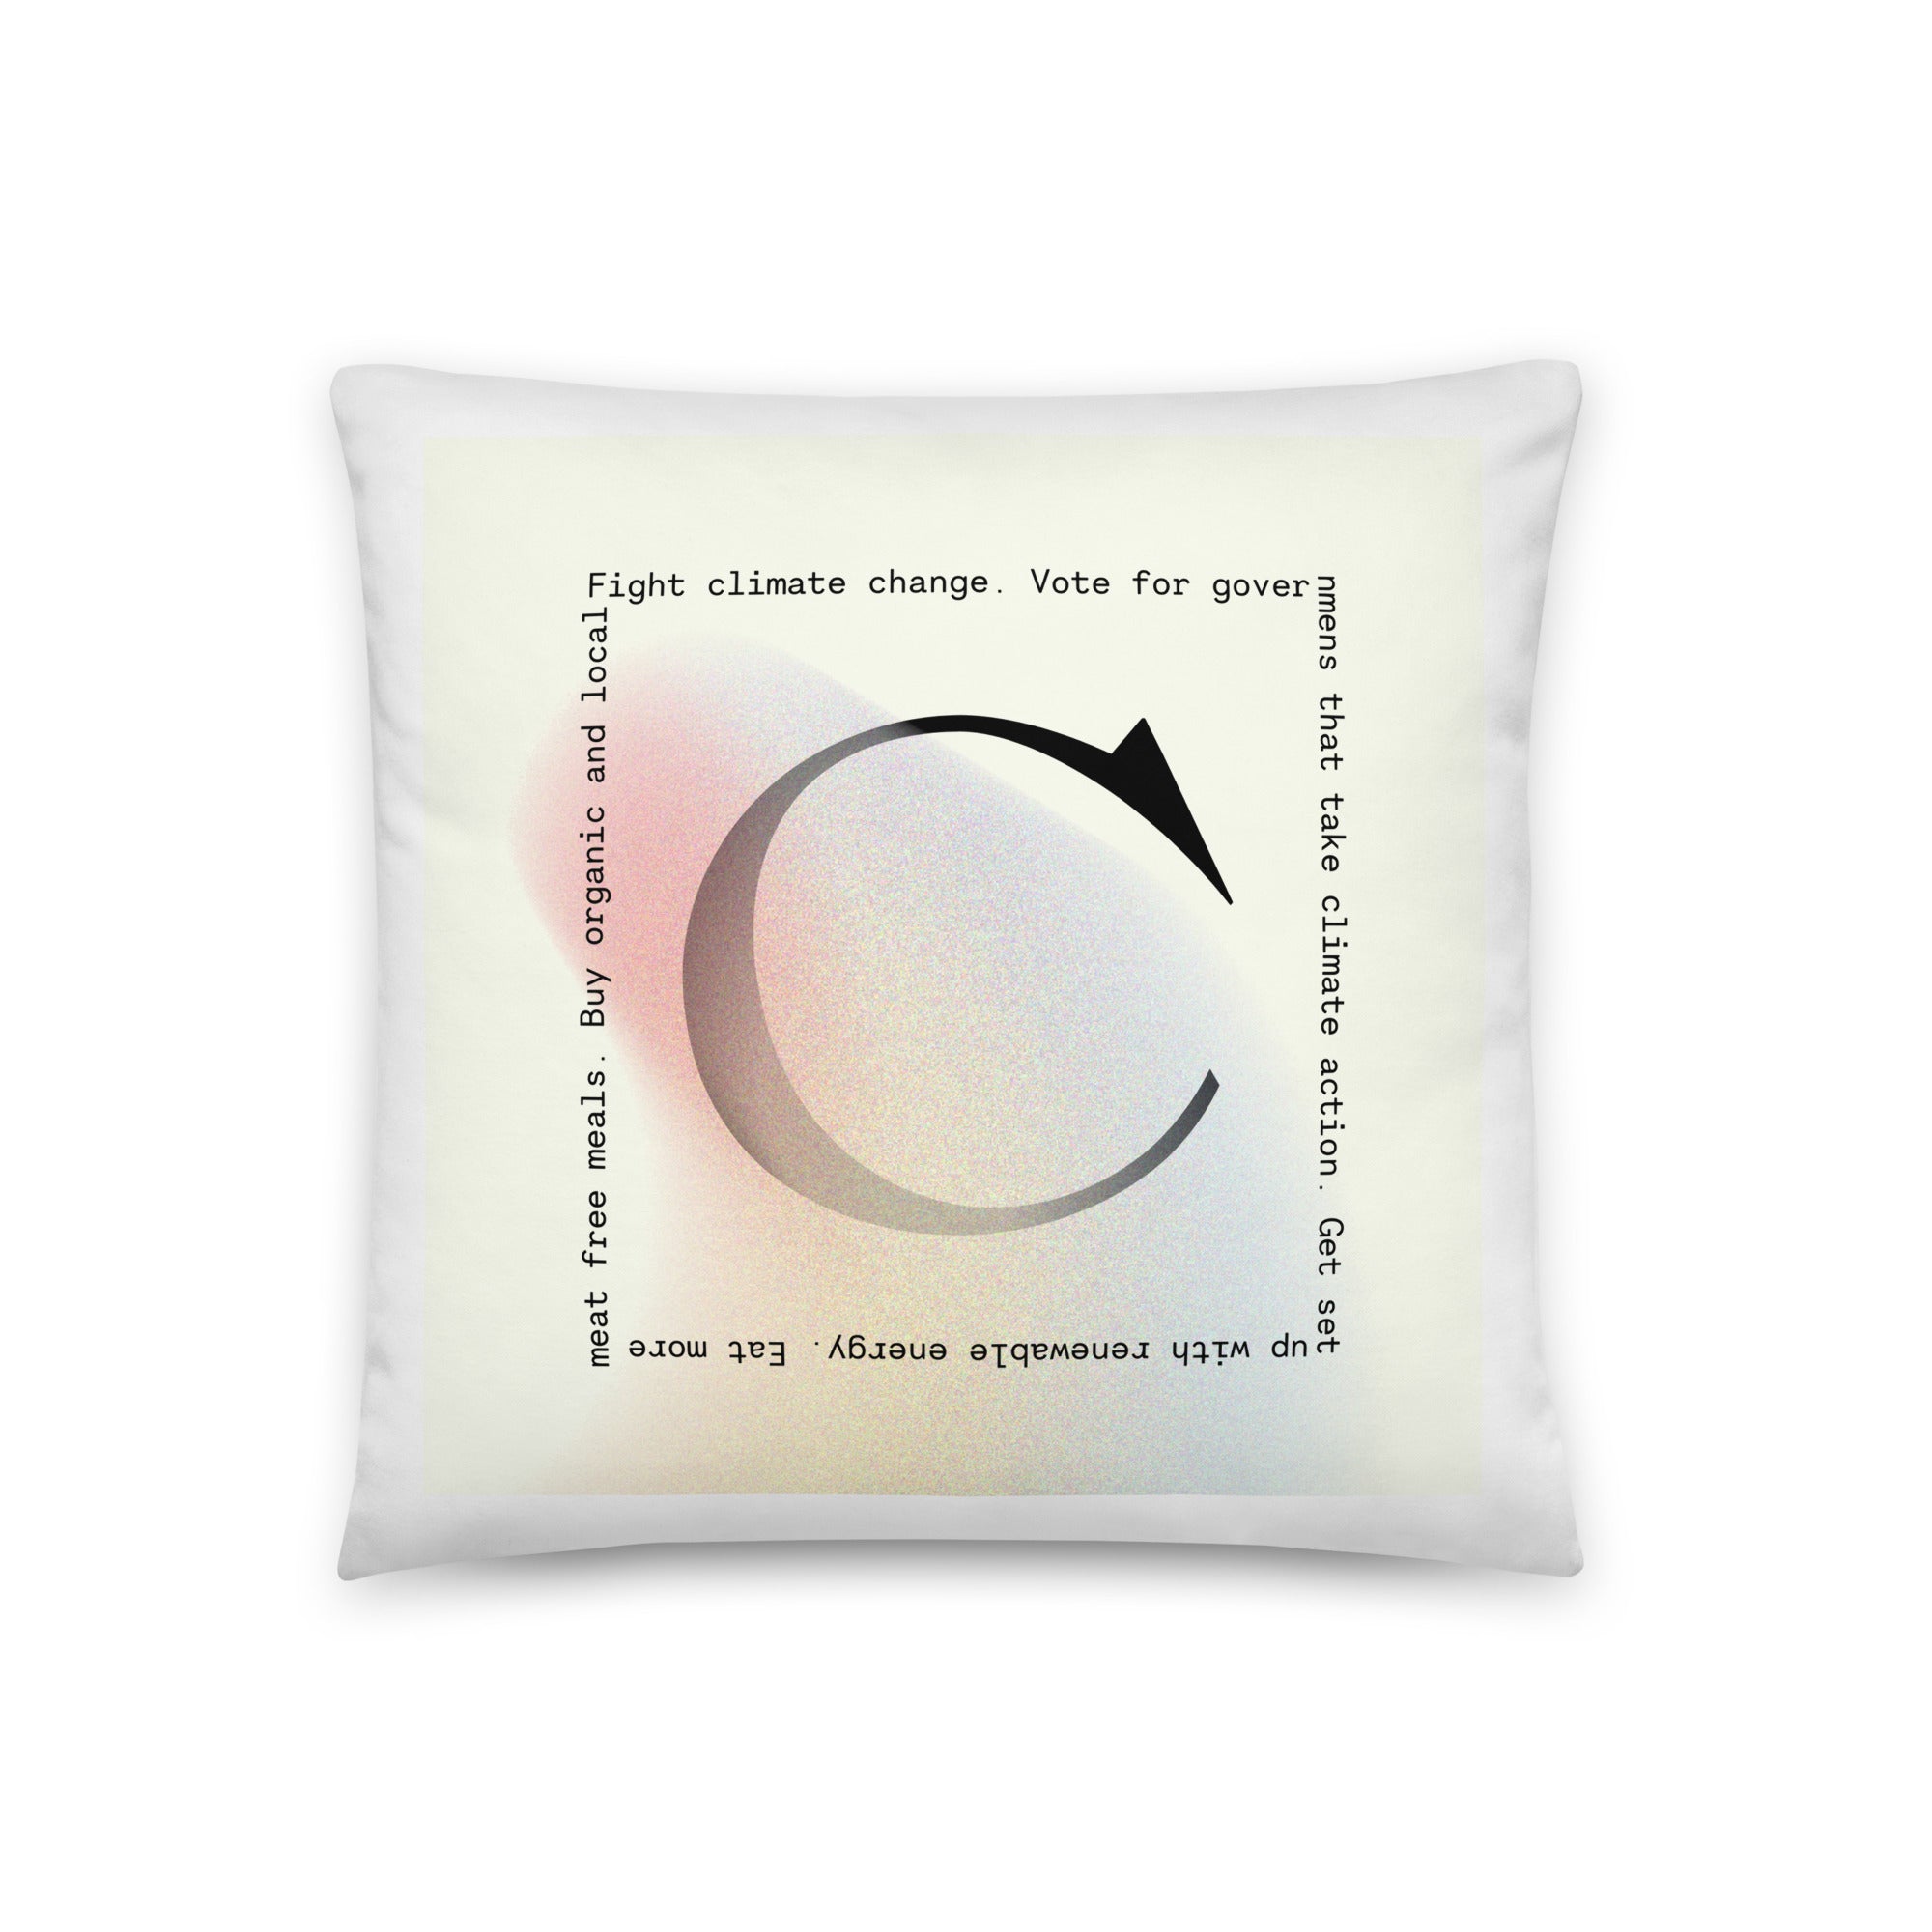 Pillow - Fight climate change